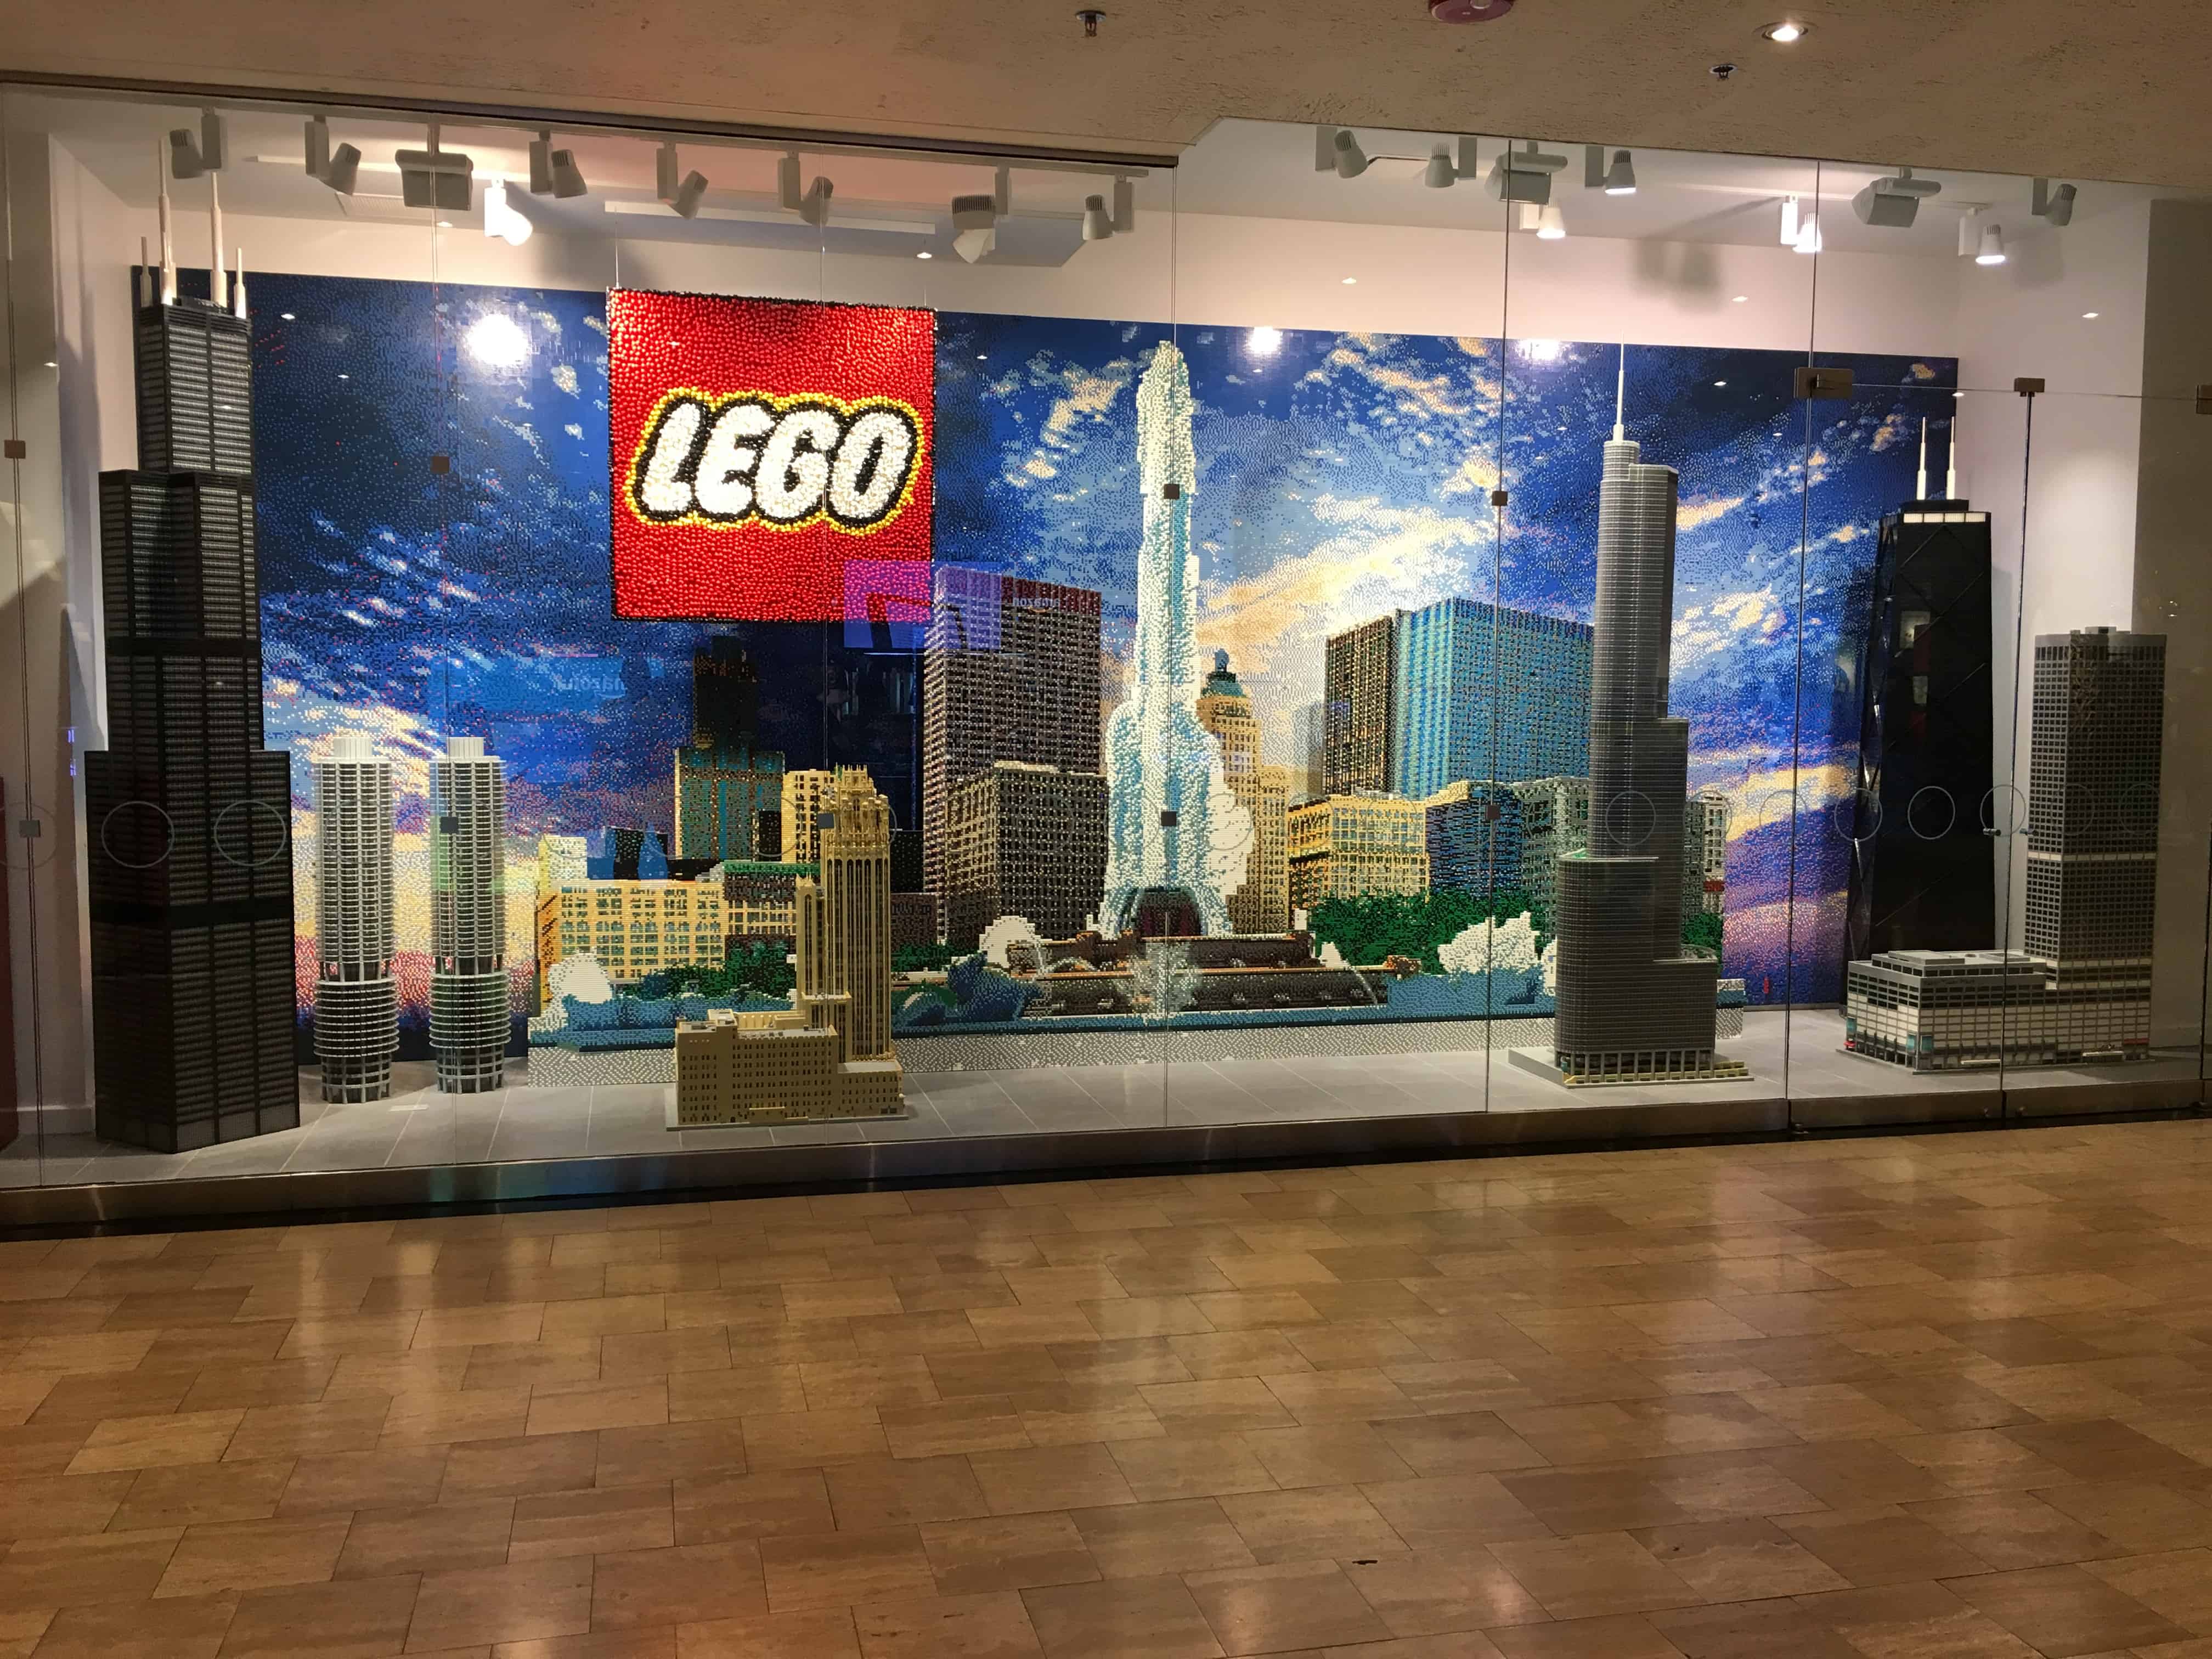 Lego display at Water Tower Place in Chicago, Illinois